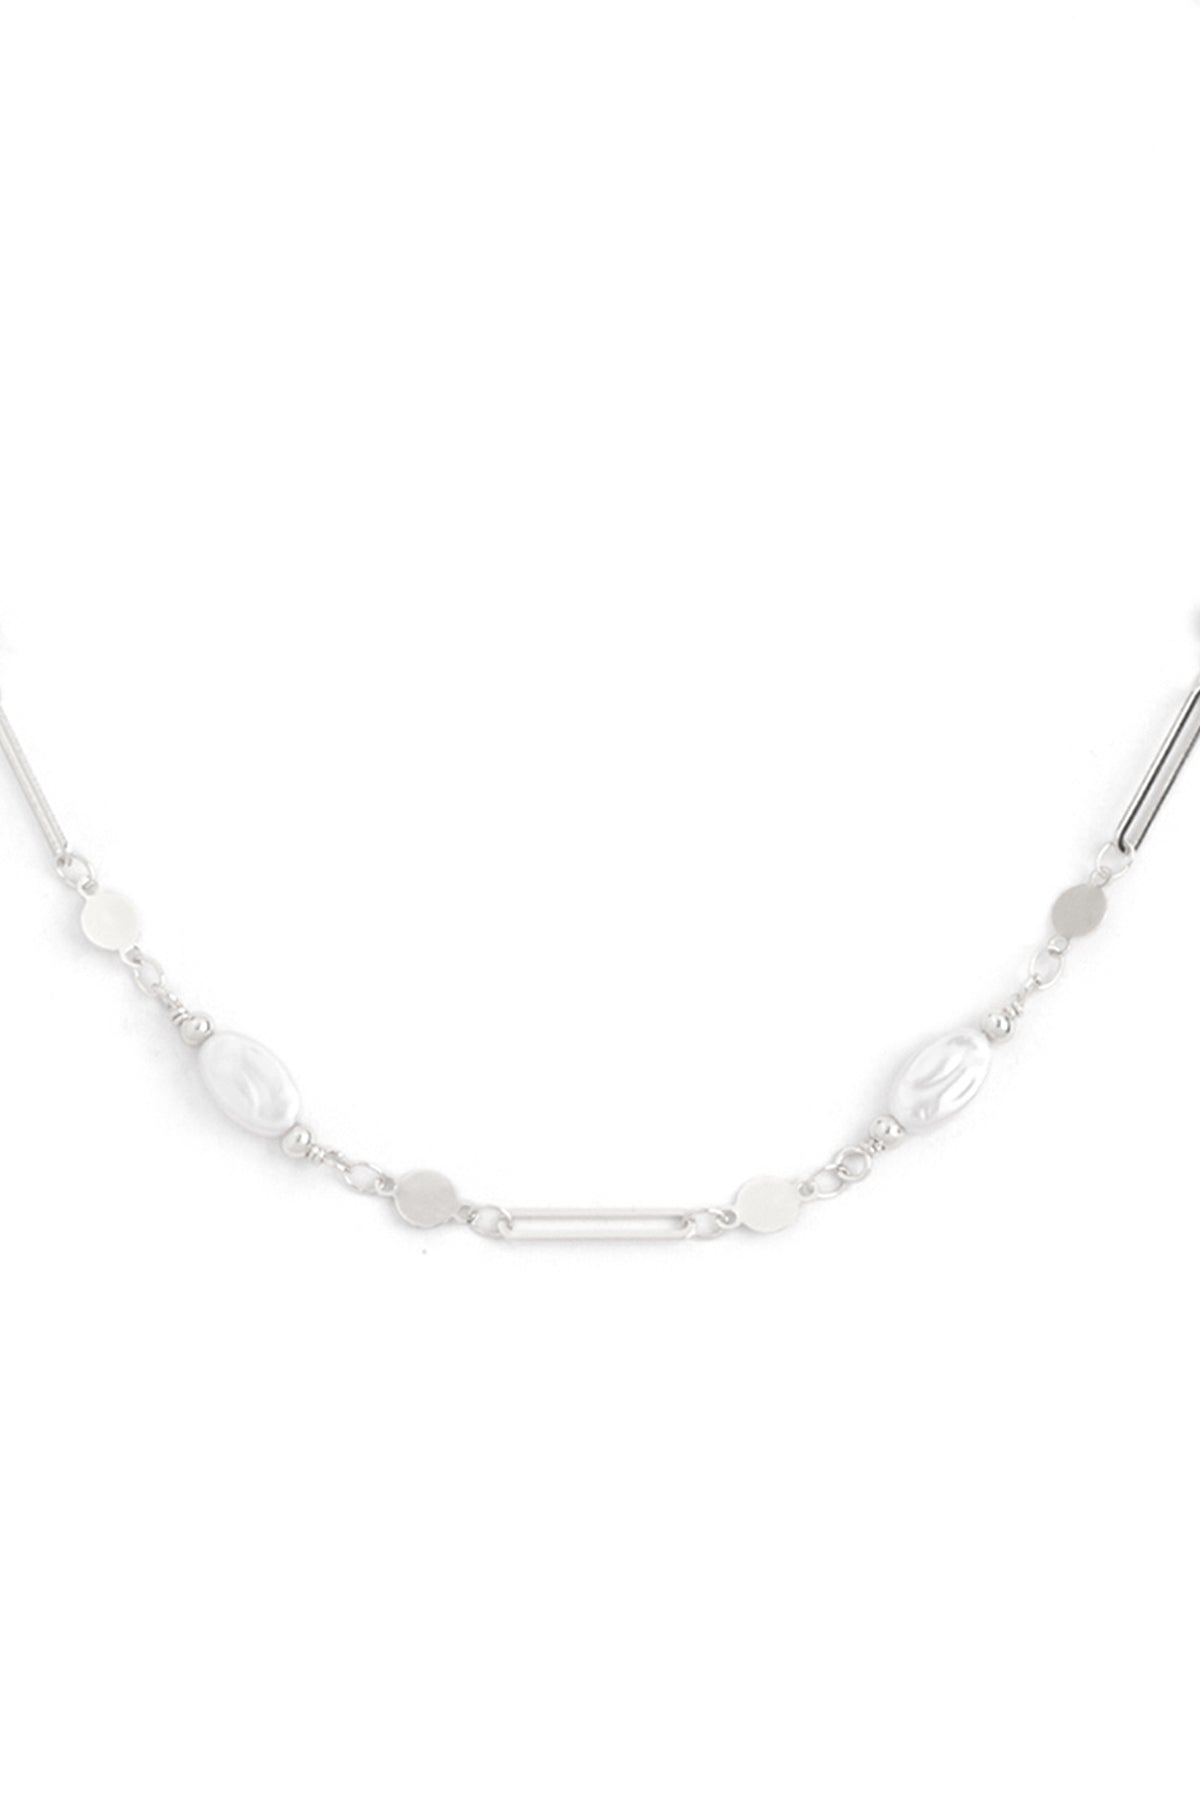 OVAL PEARL STATIONARY CHAIN NECKLACE